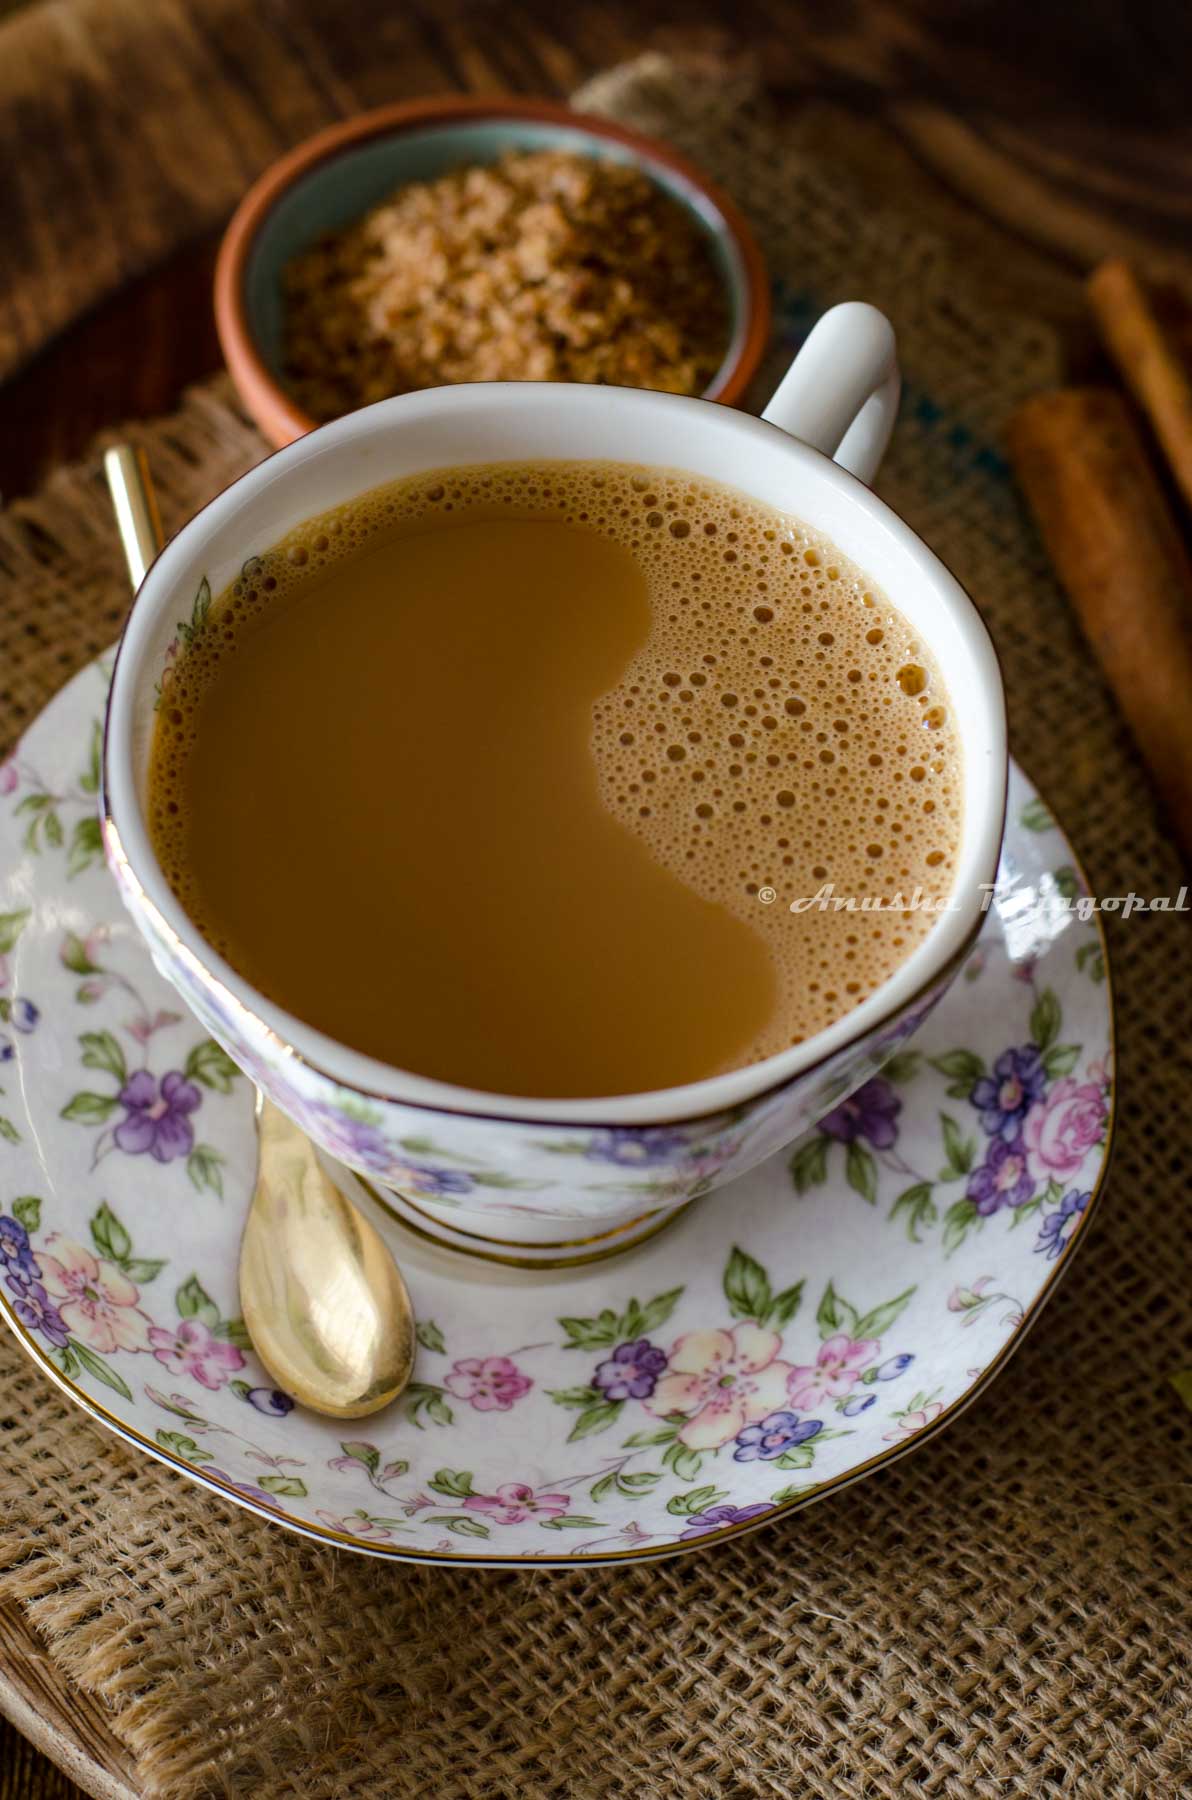 vegan masala chai served in a floral patterned cup and saucer set. A small sugar spoon rests on the saucer. A few cinnamon sticks, a pinch bowl of sugar and some whole spices by the side and around the cup of tea.